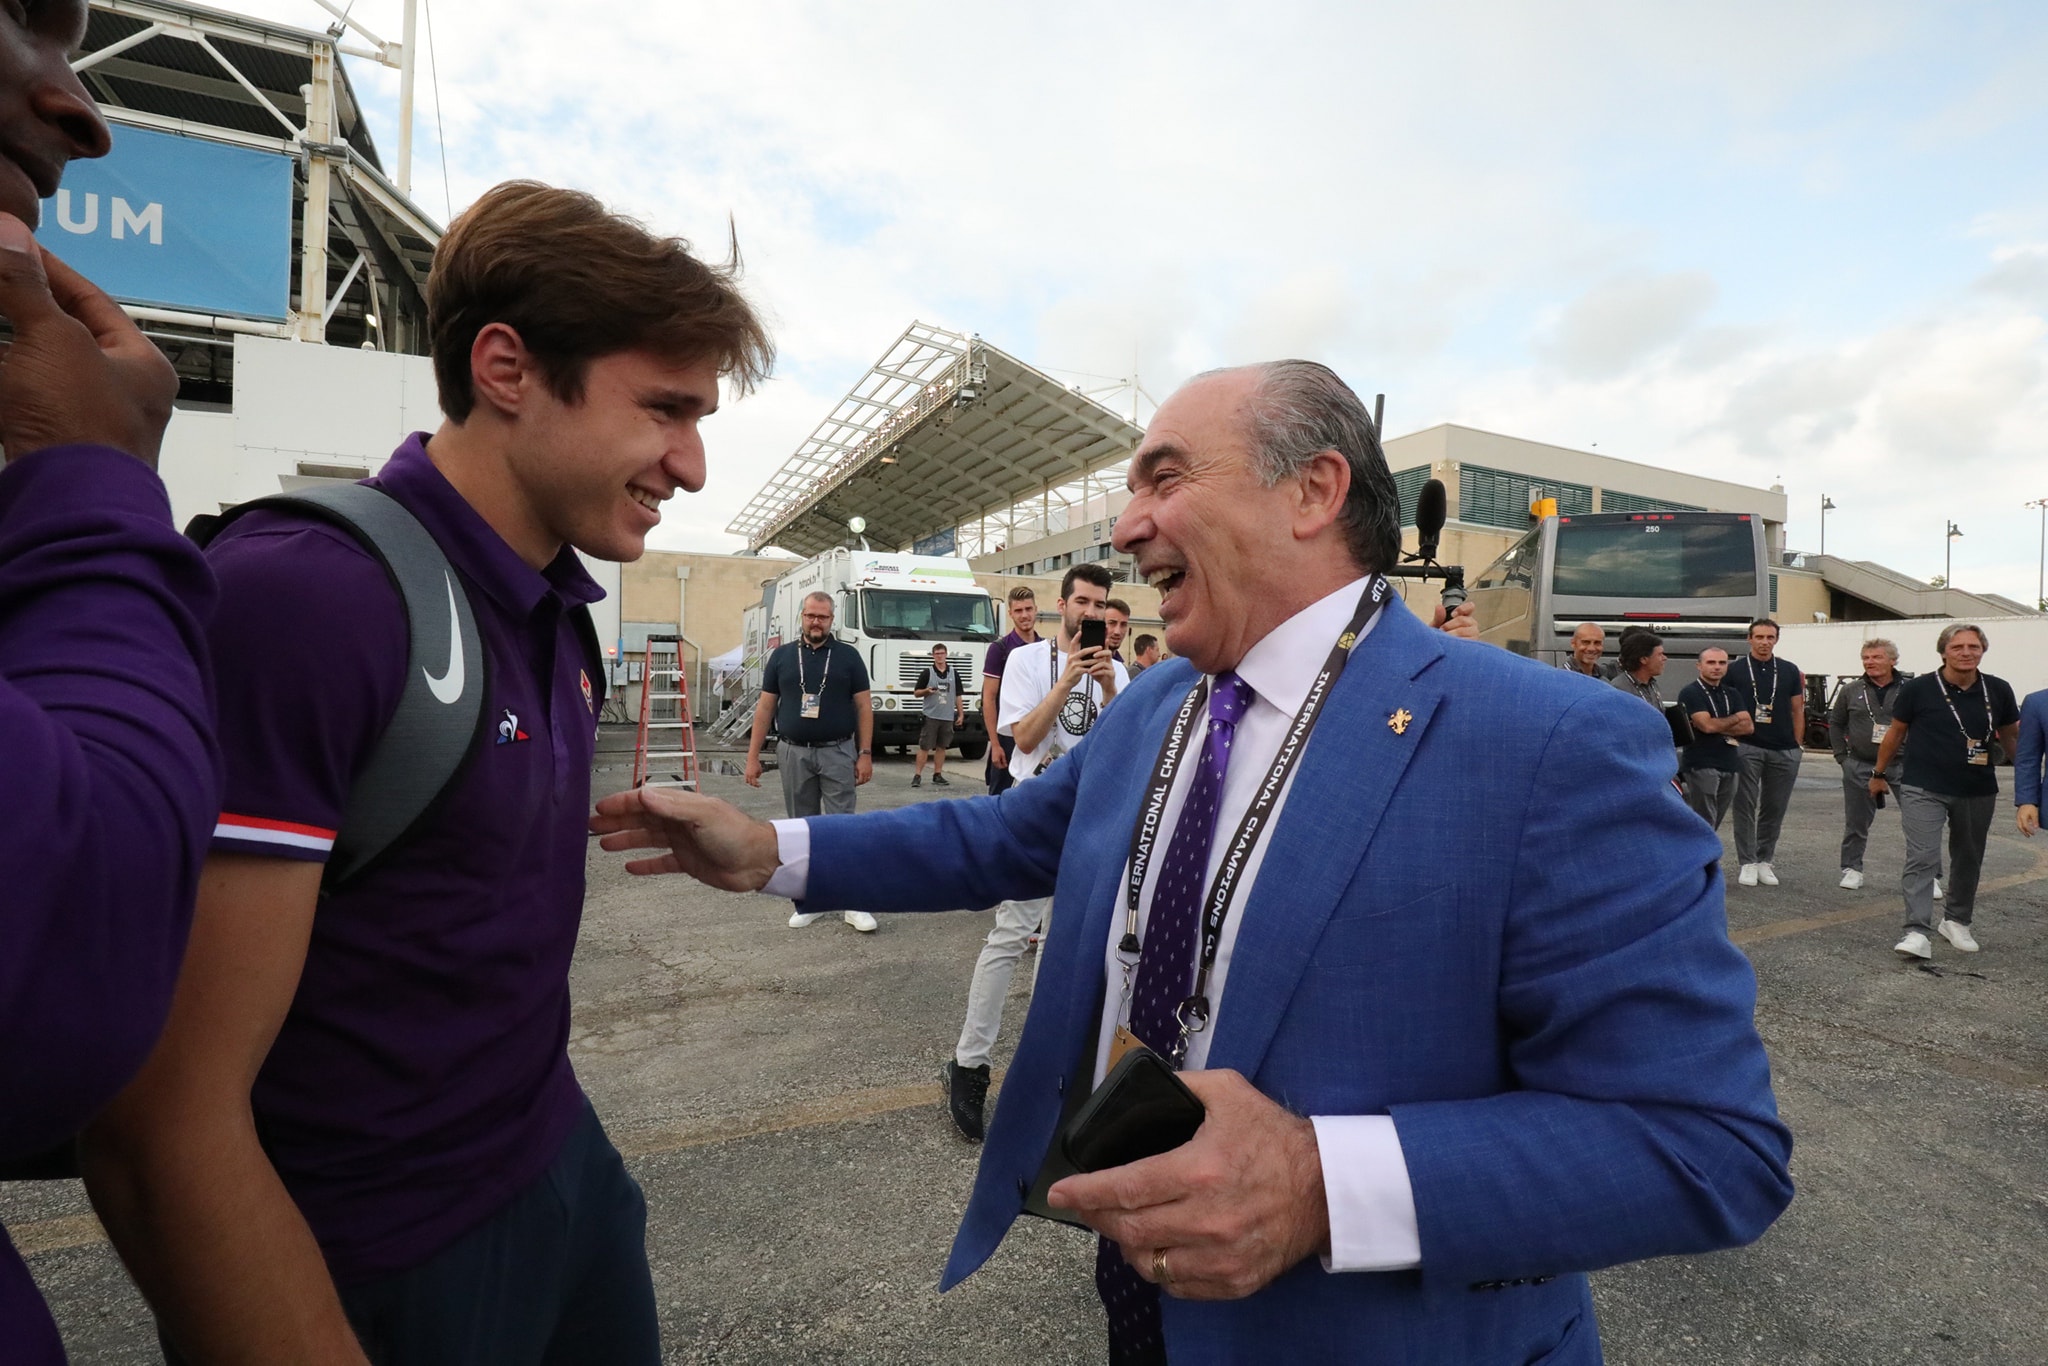 Federico Chiesa has stated his desire to leave Fiorentina, with both Milan and Juventus having been linked with the Italian starlet